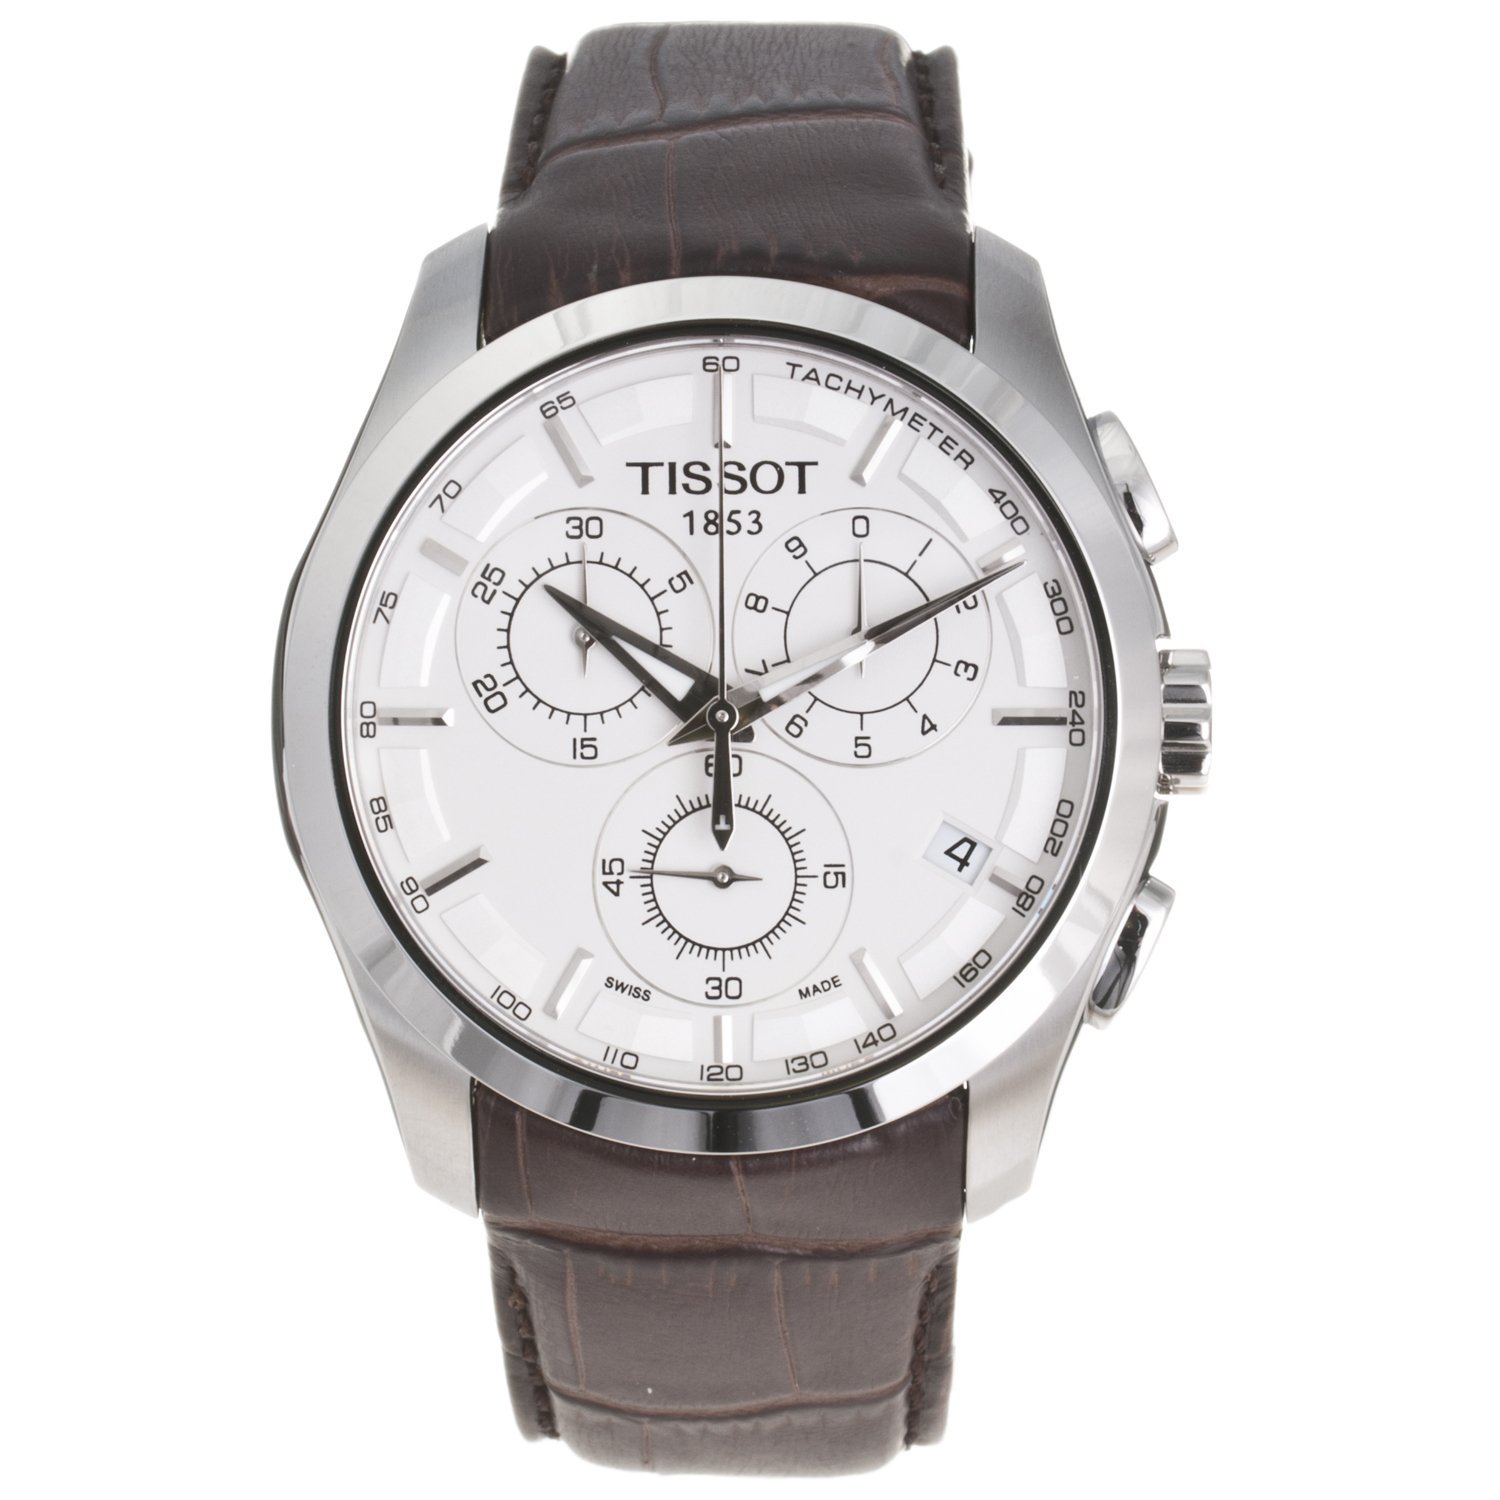 Tissot Men's Couturier Watch T0356171603100 Leather Chrono